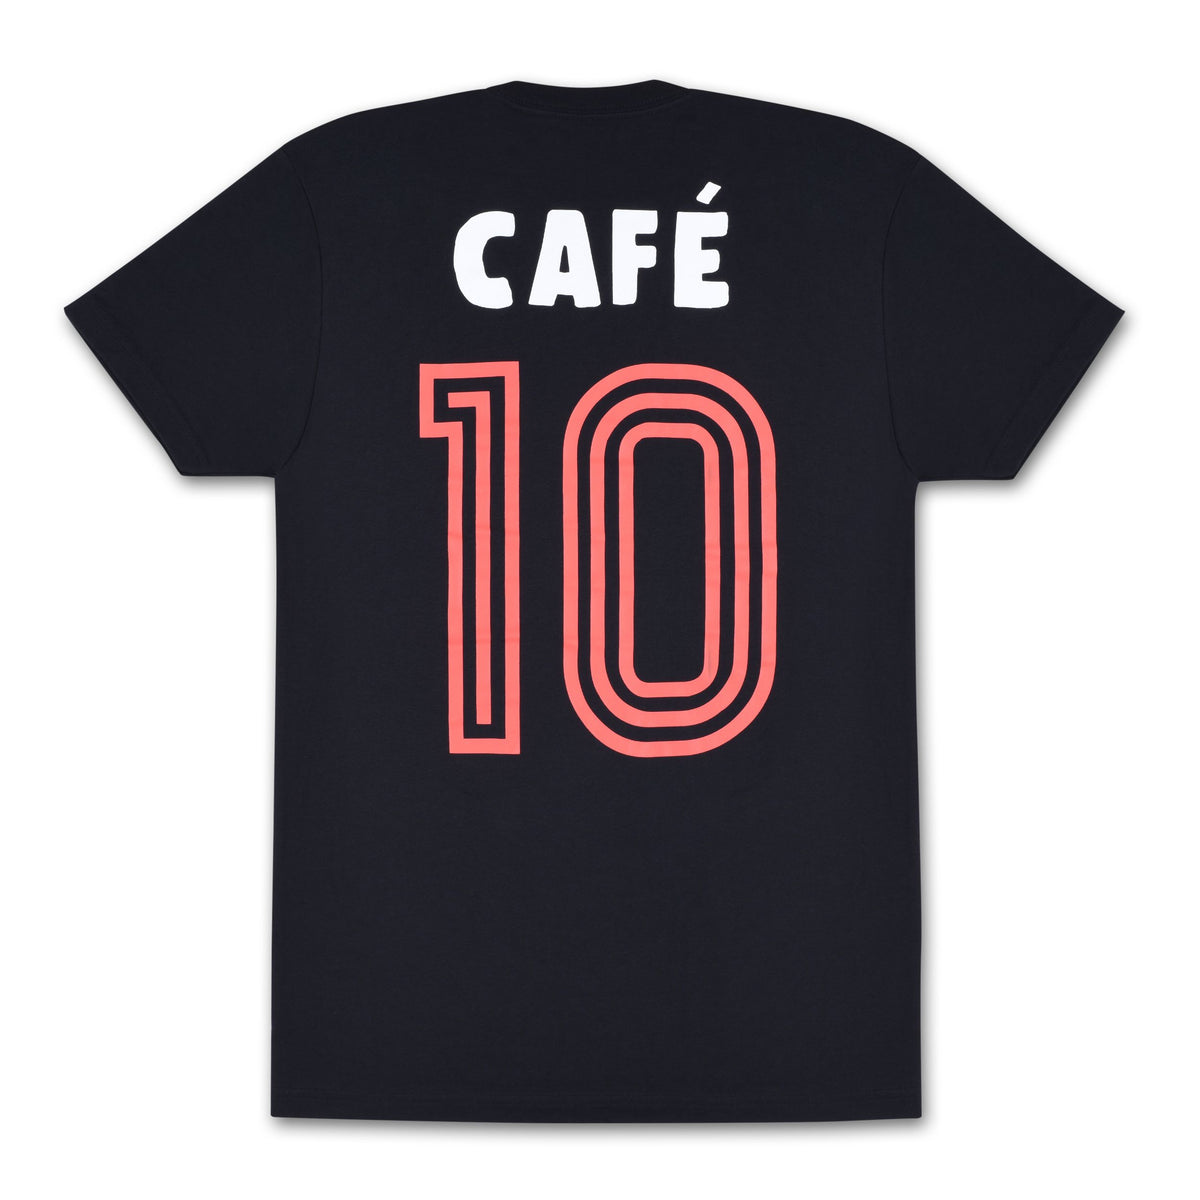 Black t-shirt with Cafe 10 logo on the back 